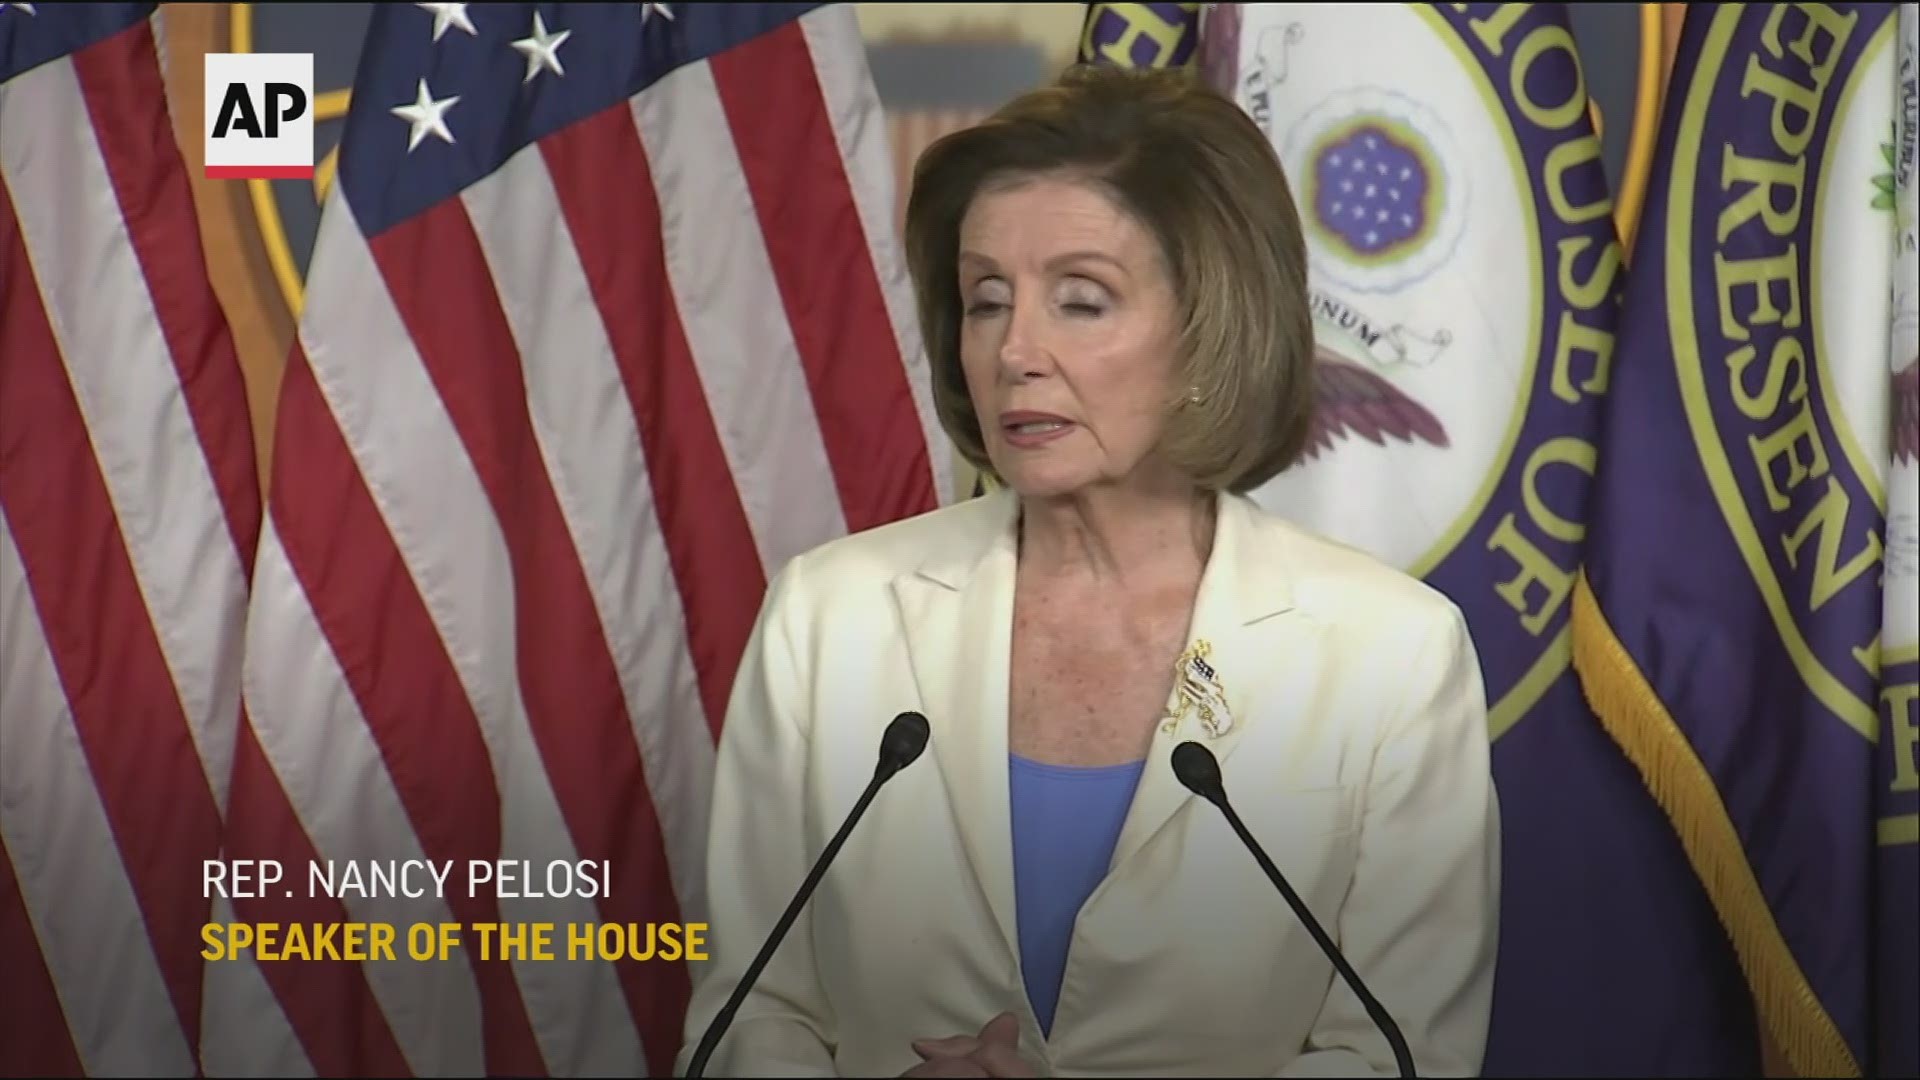 House Speaker Nancy Pelosi said the panel will "seek the truth" about the Jan. 6 insurrection.